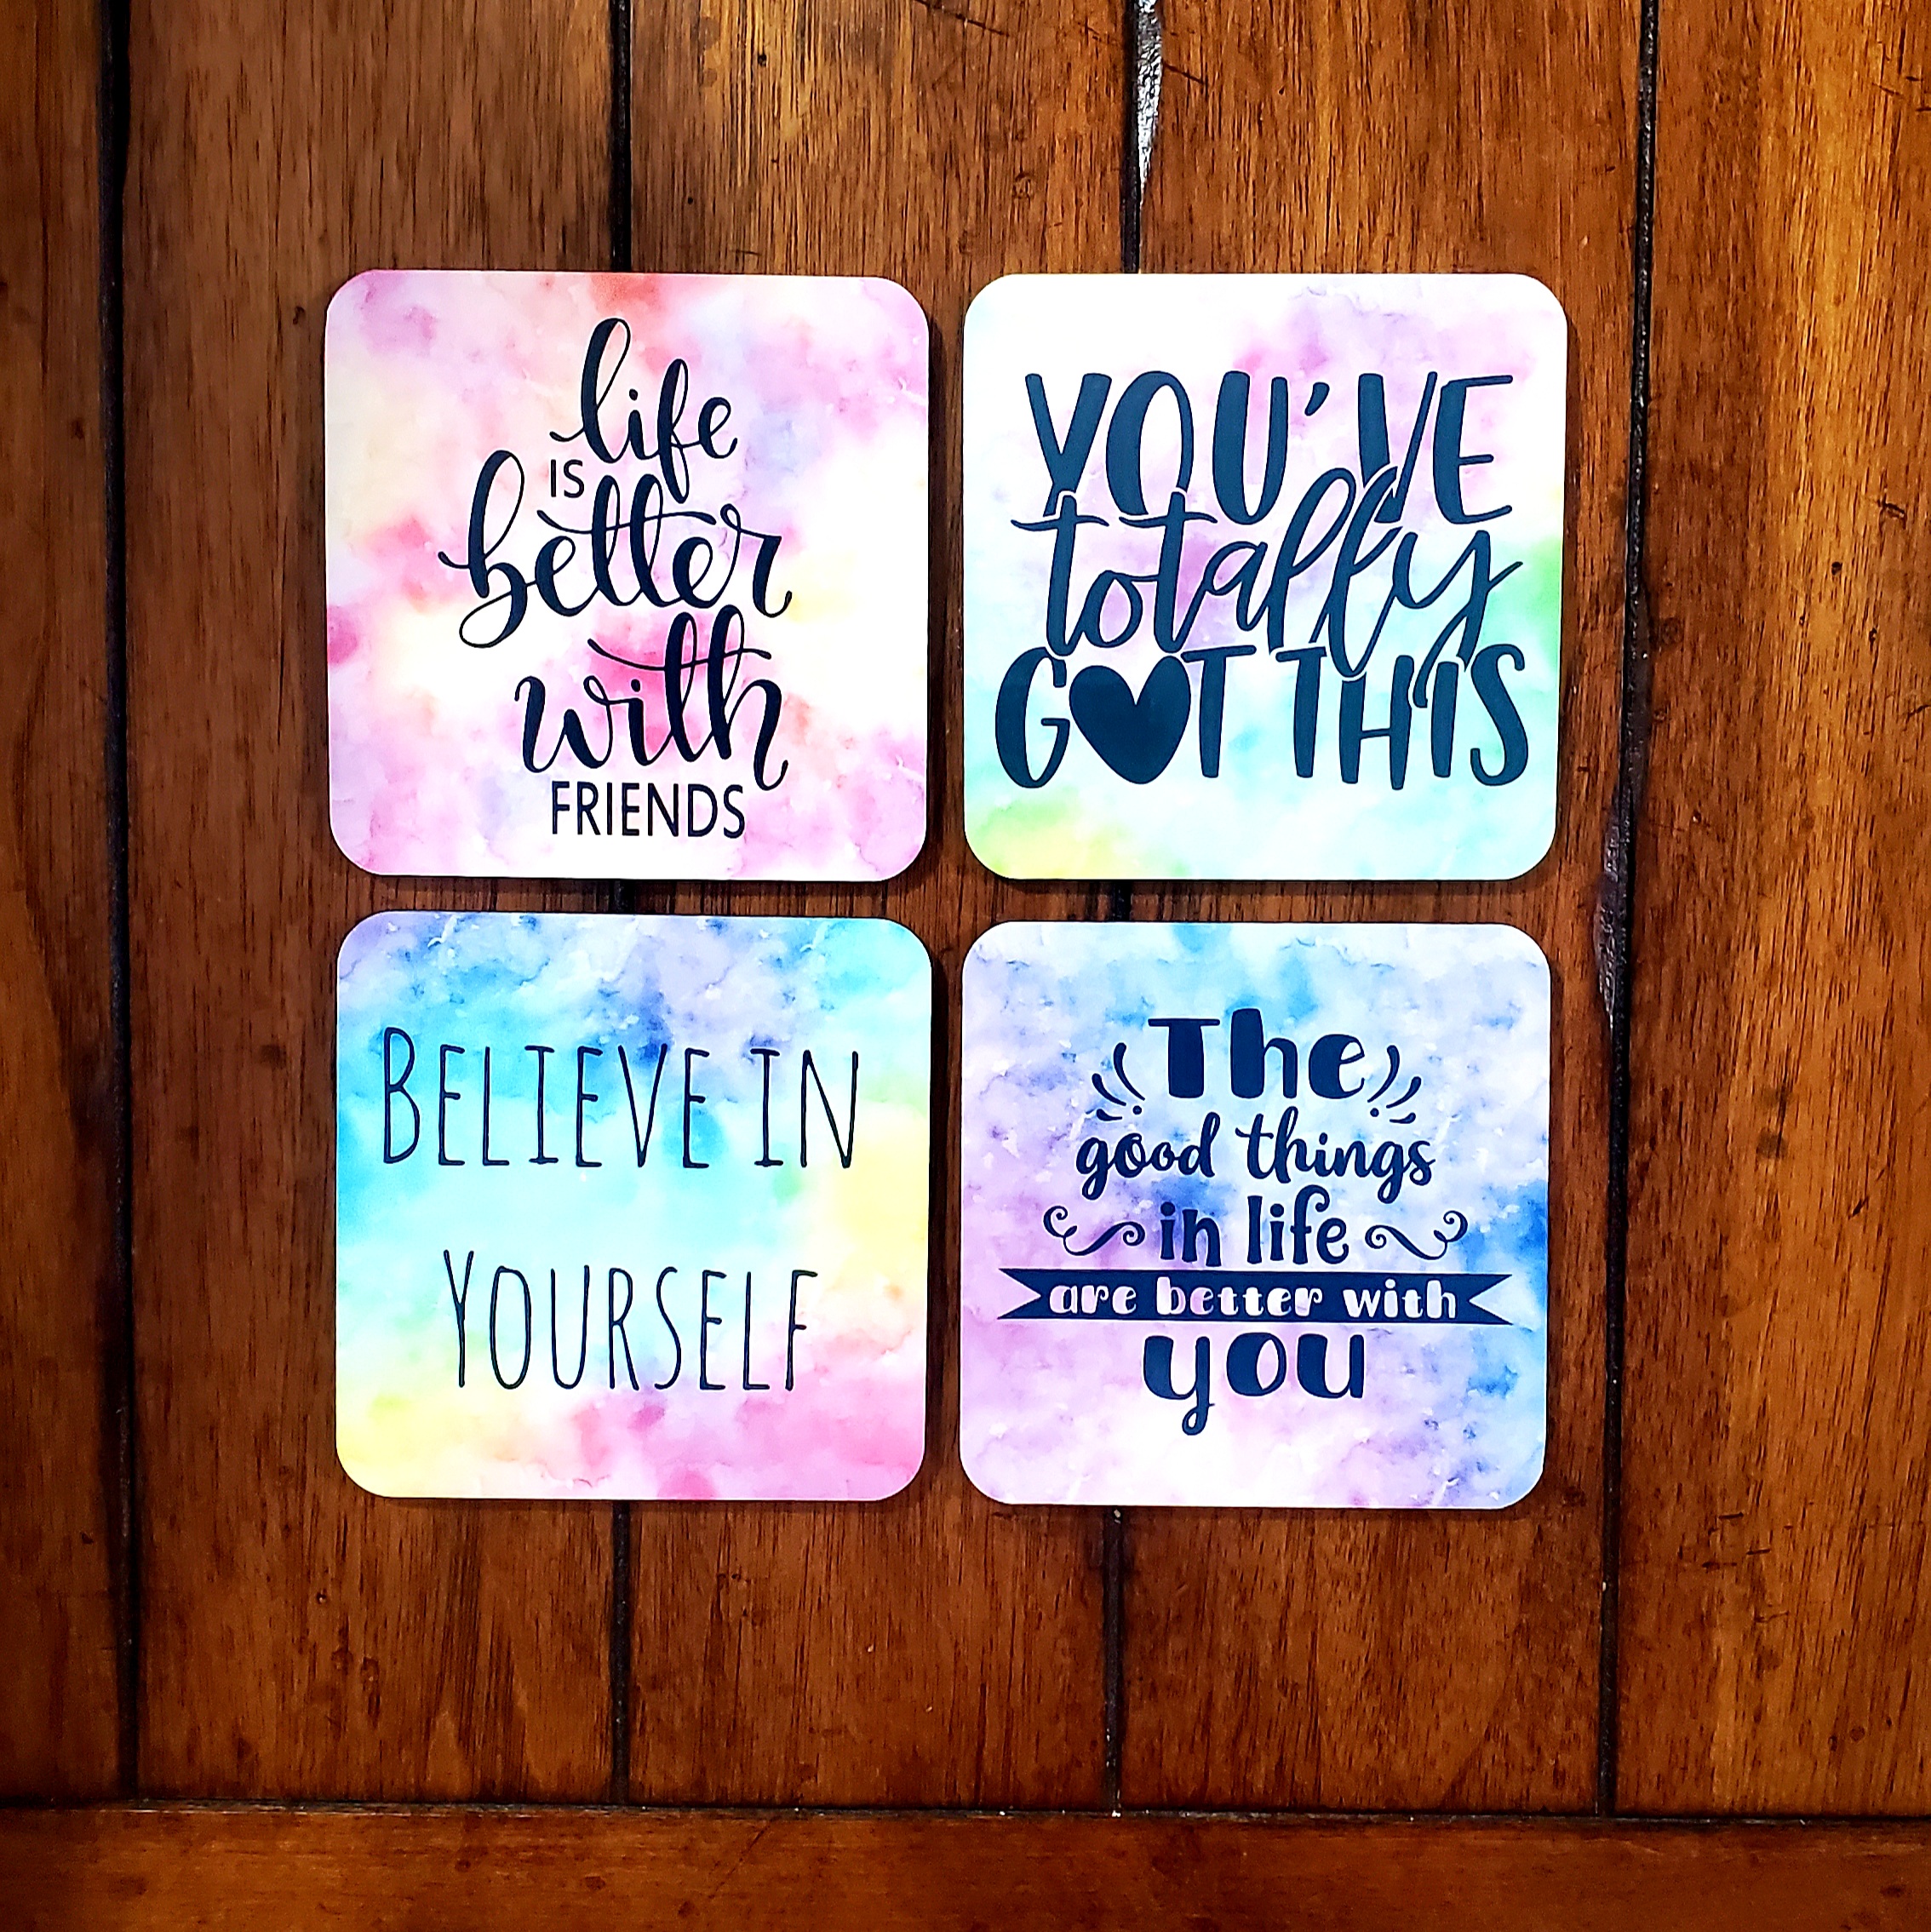 Watercolor Coasters made with sublimation printing